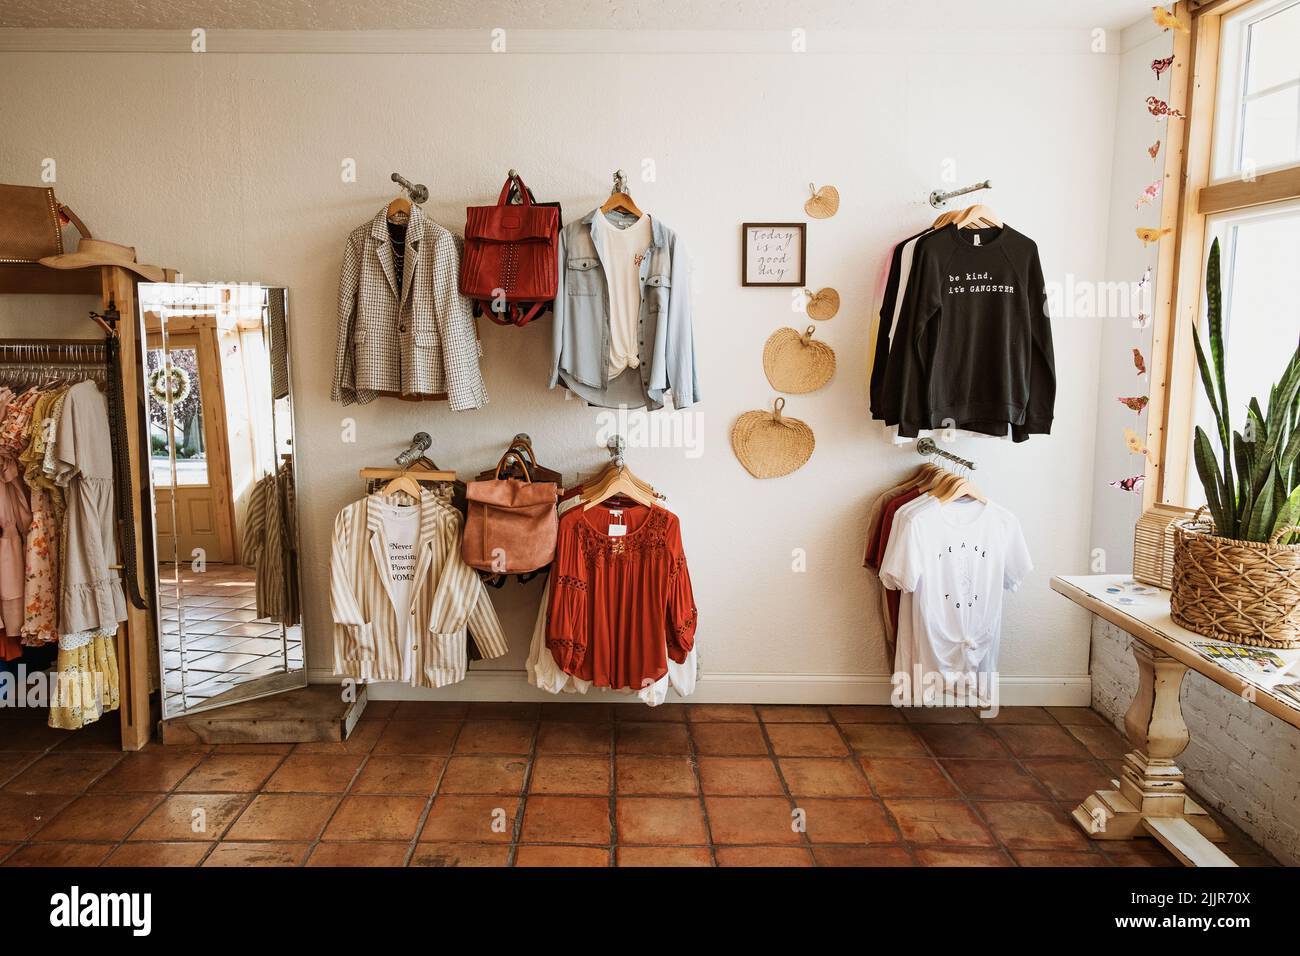 An interior of clothing store Stock Photo